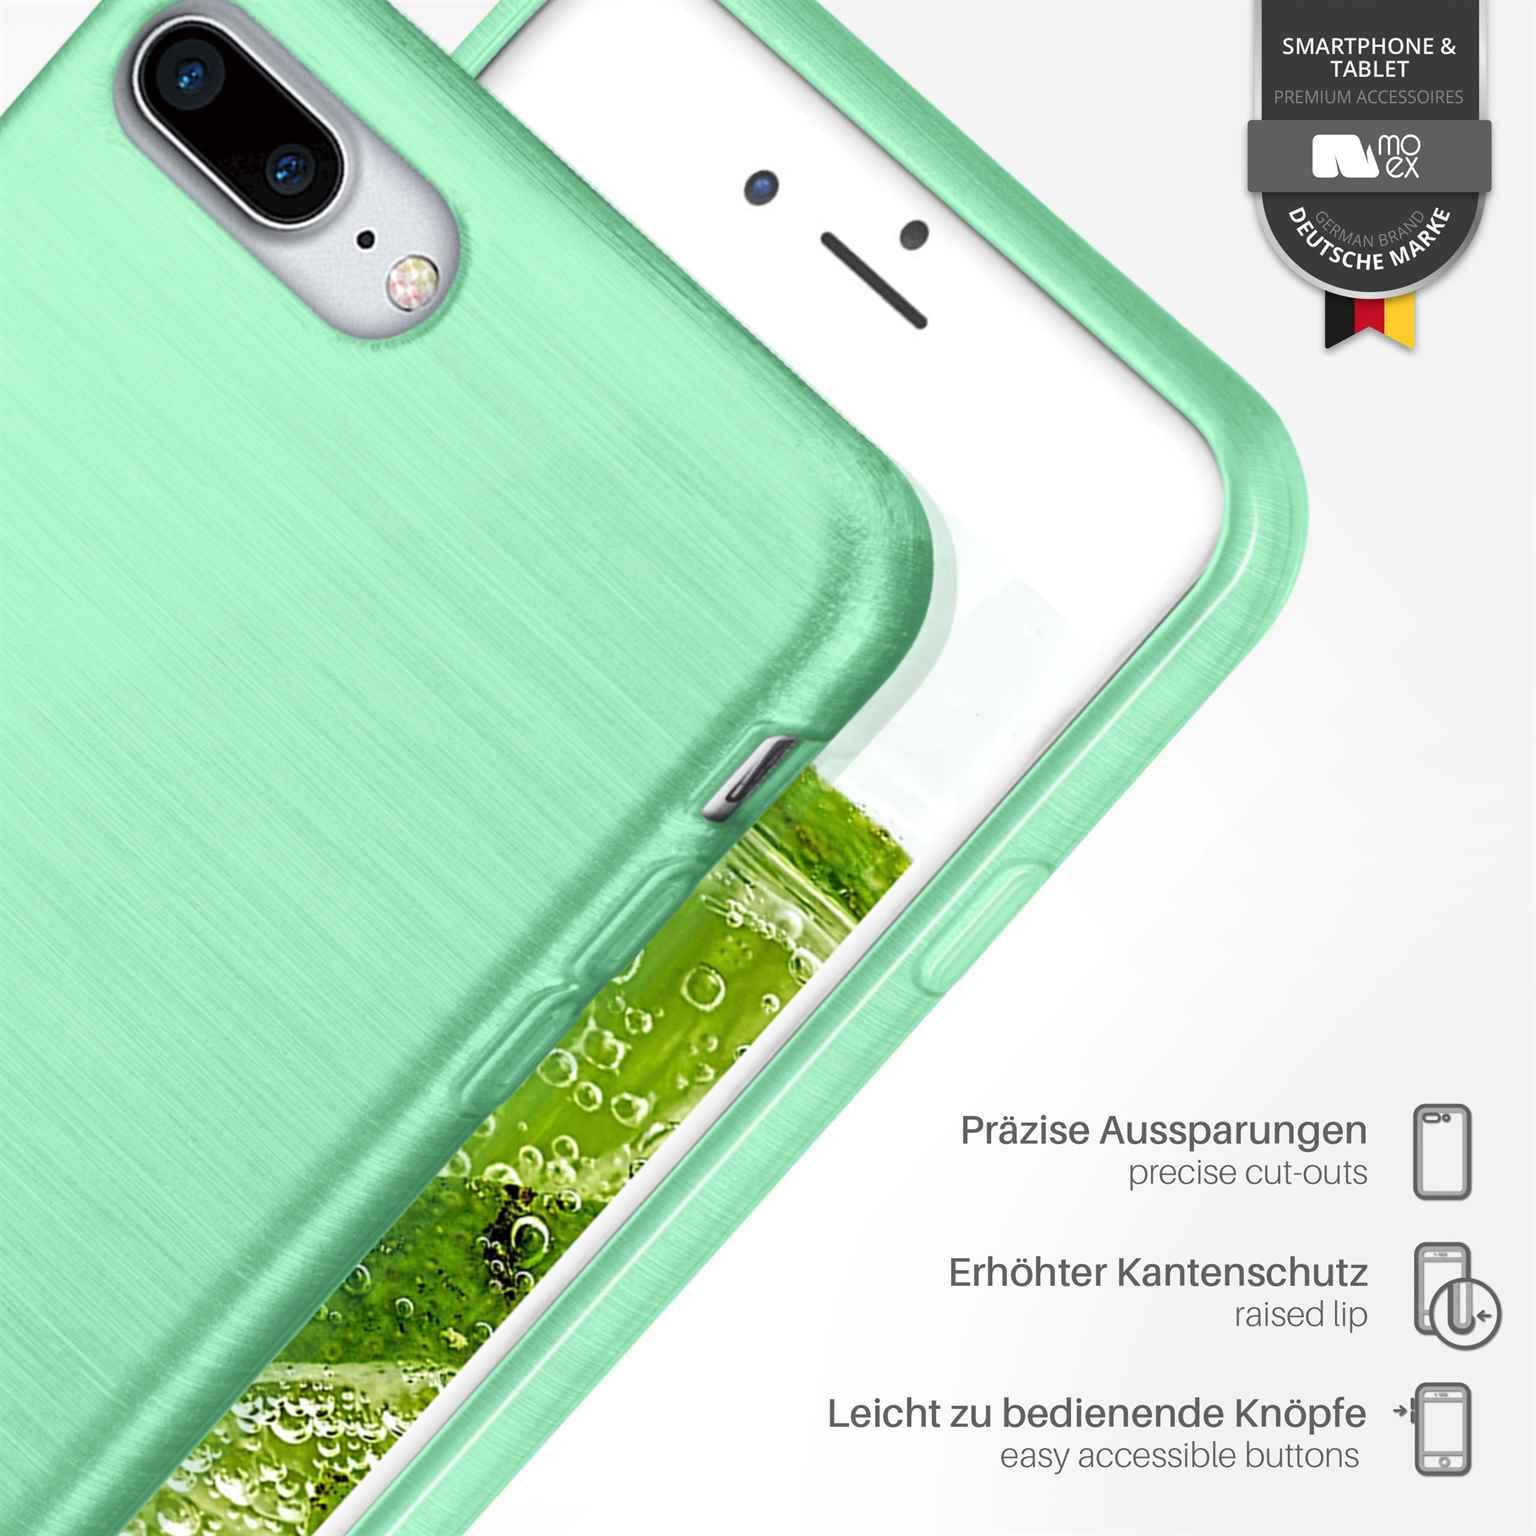 Plus, MOEX iPhone 8 Brushed Apple, Mint-Green Backcover, Case,